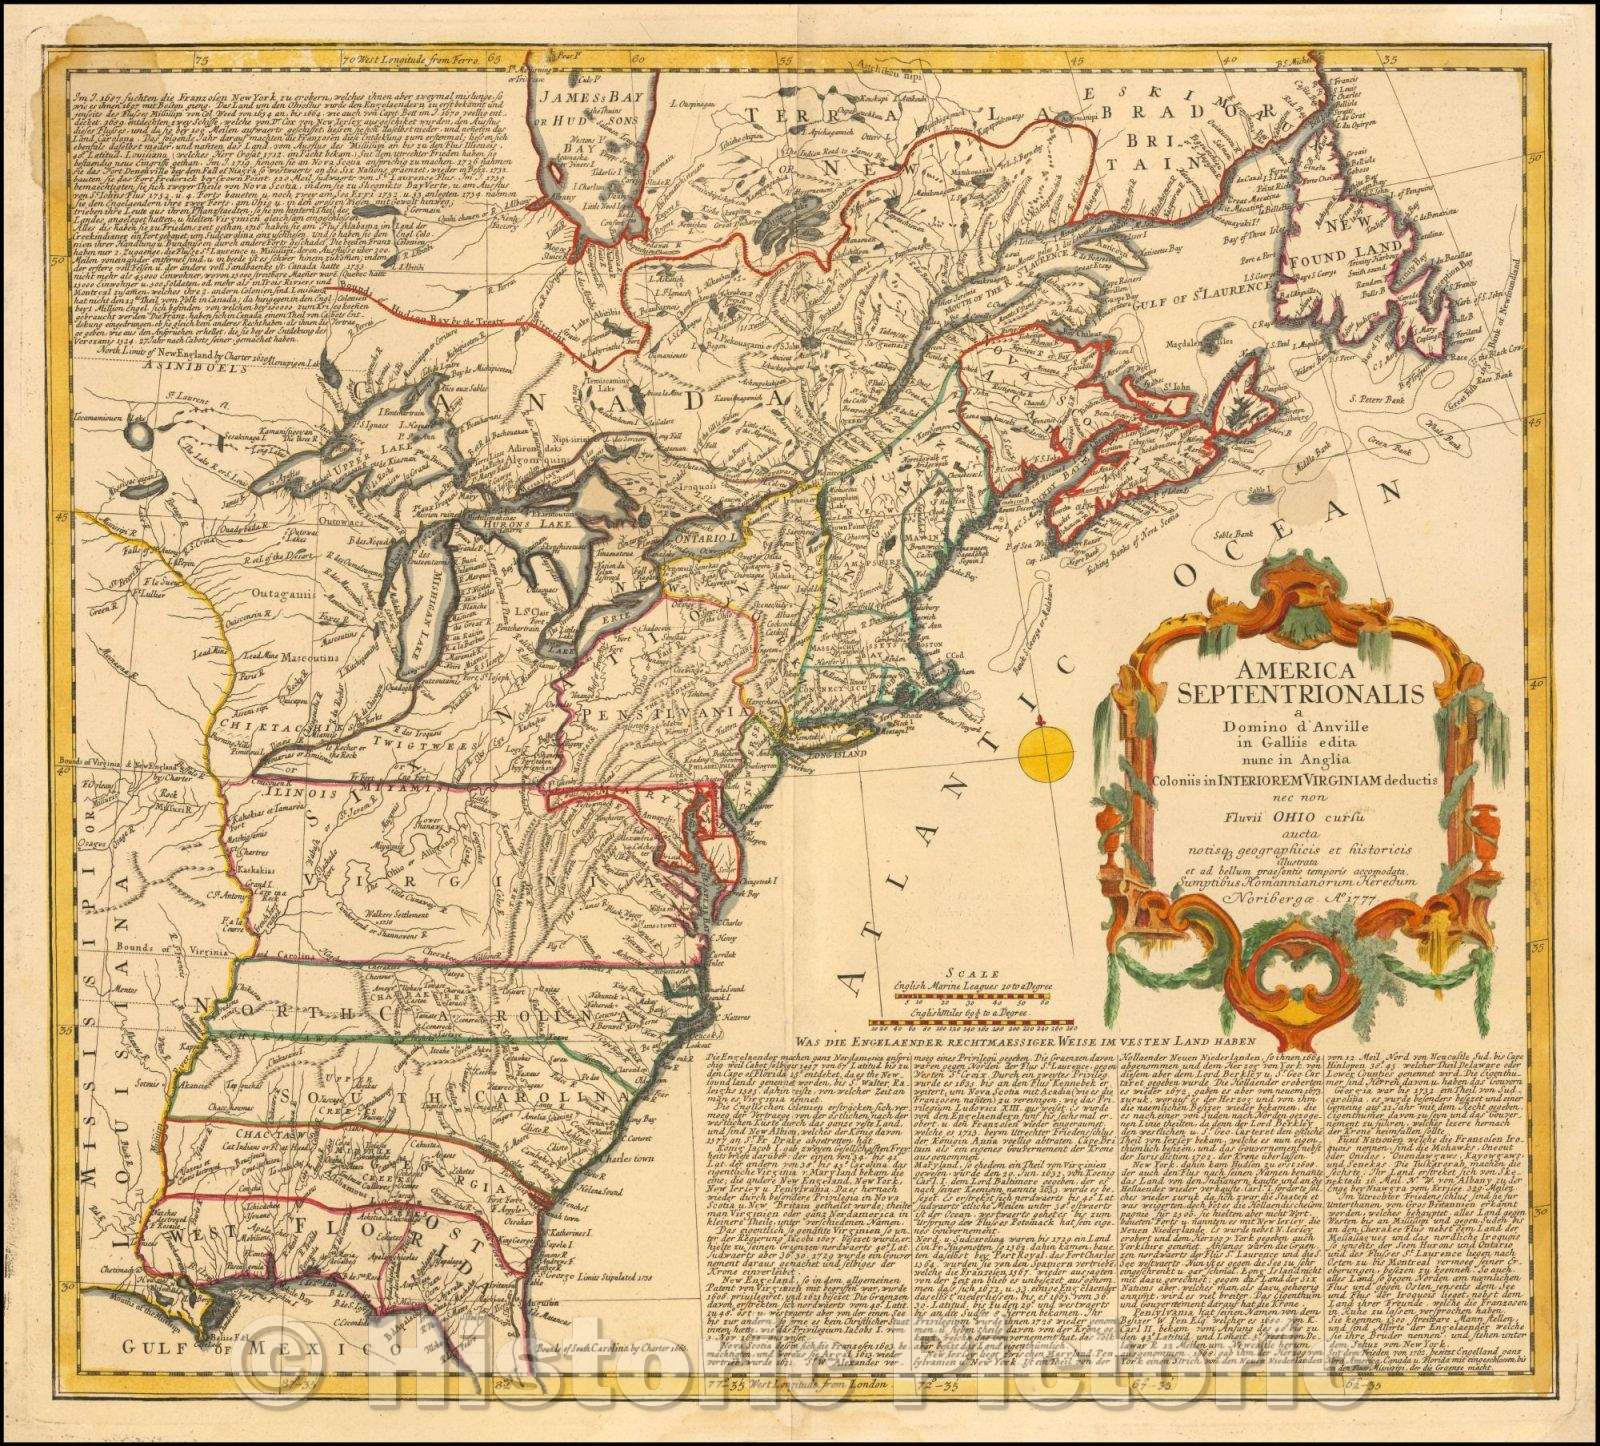 Historic Map - America Septentrionalis a Domino d'Anville in Galliis edita nunc in Anglia :: Lord d'Anville in North America with England Colonies, 1777 - Vintage Wall Art